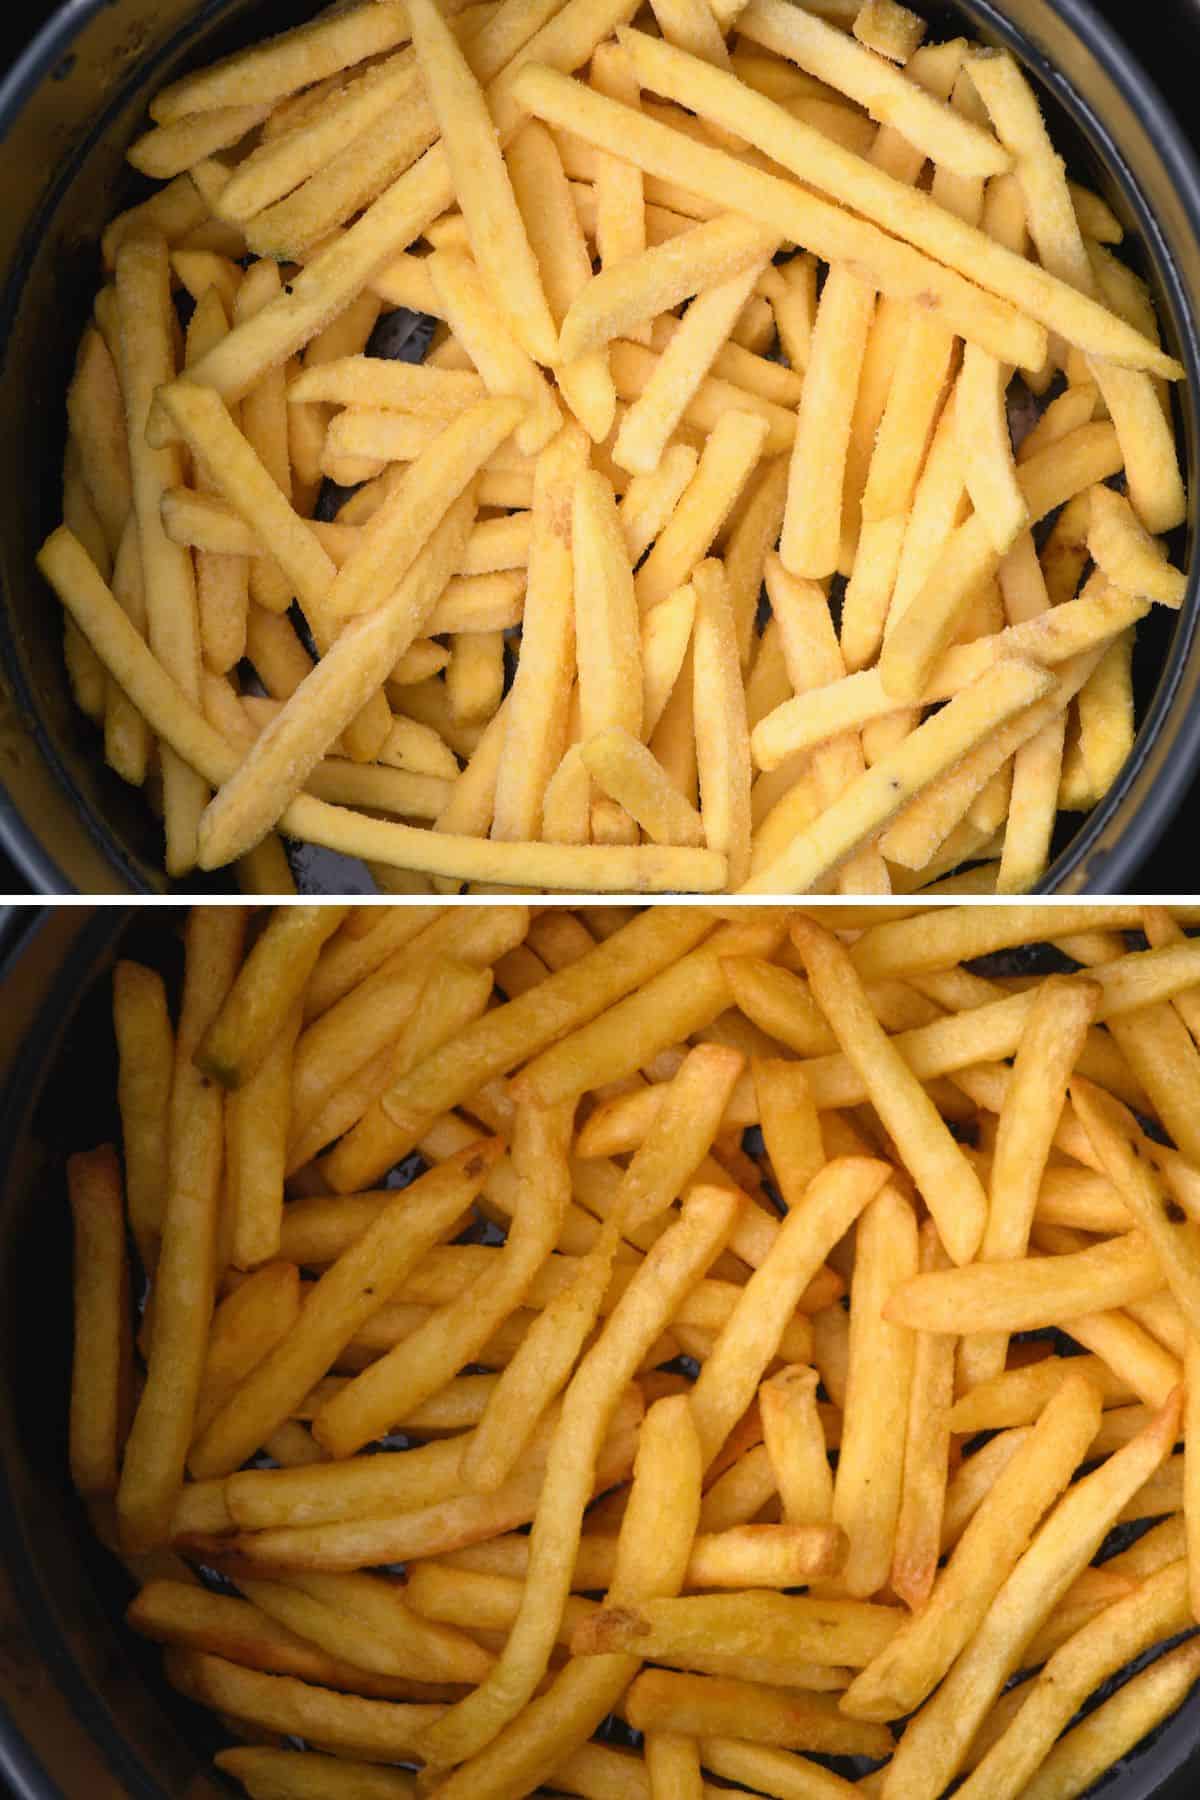 Before and after air frying frozen french fries